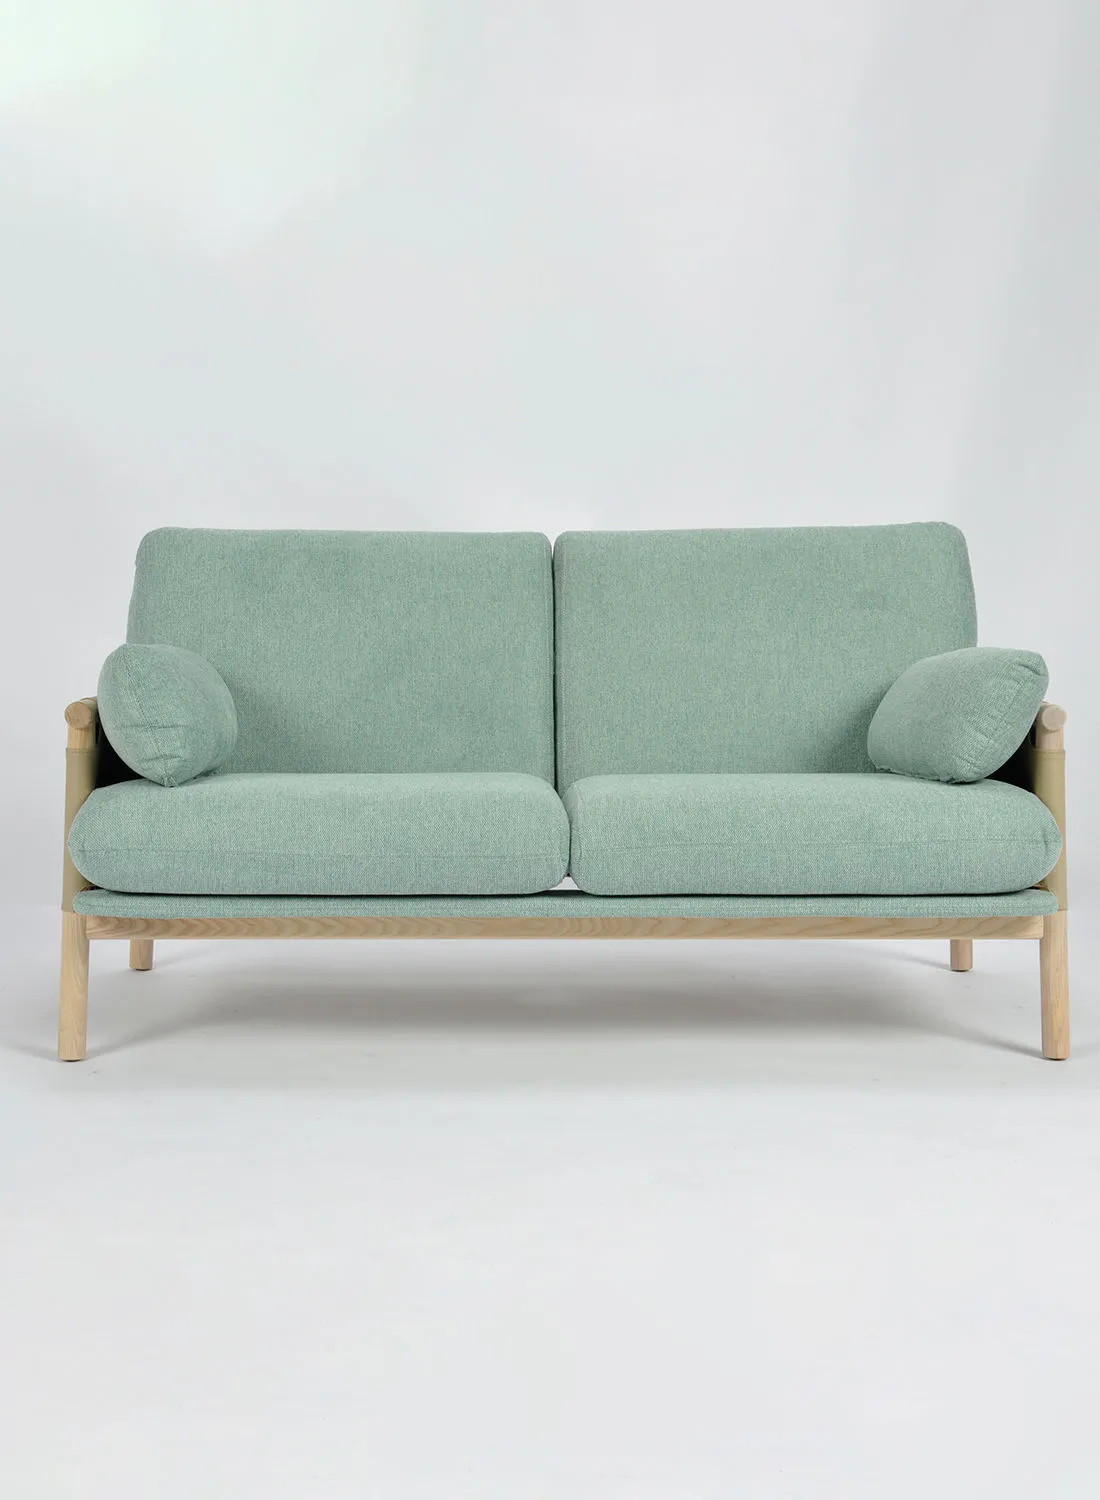 Switch Armchair - Green Couch - 148 X 82 X 78 - Relaxing Sofa